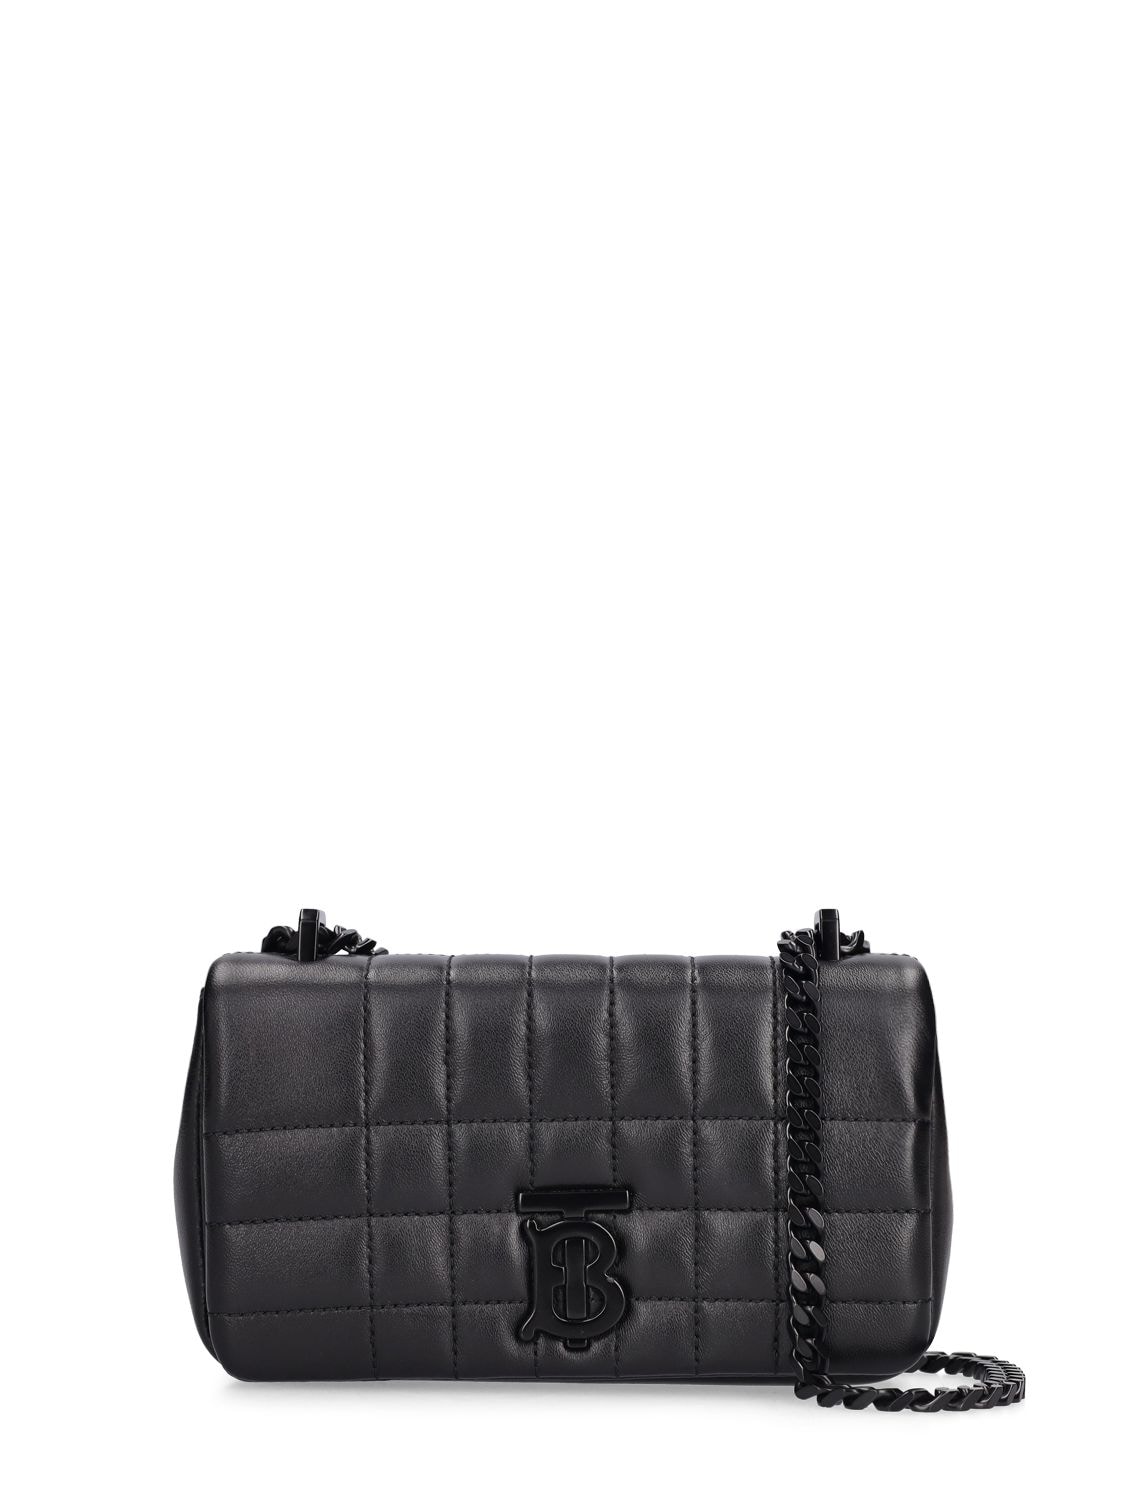 Burberry Mini Lola Quilted Leather Shoulder Bag In Black